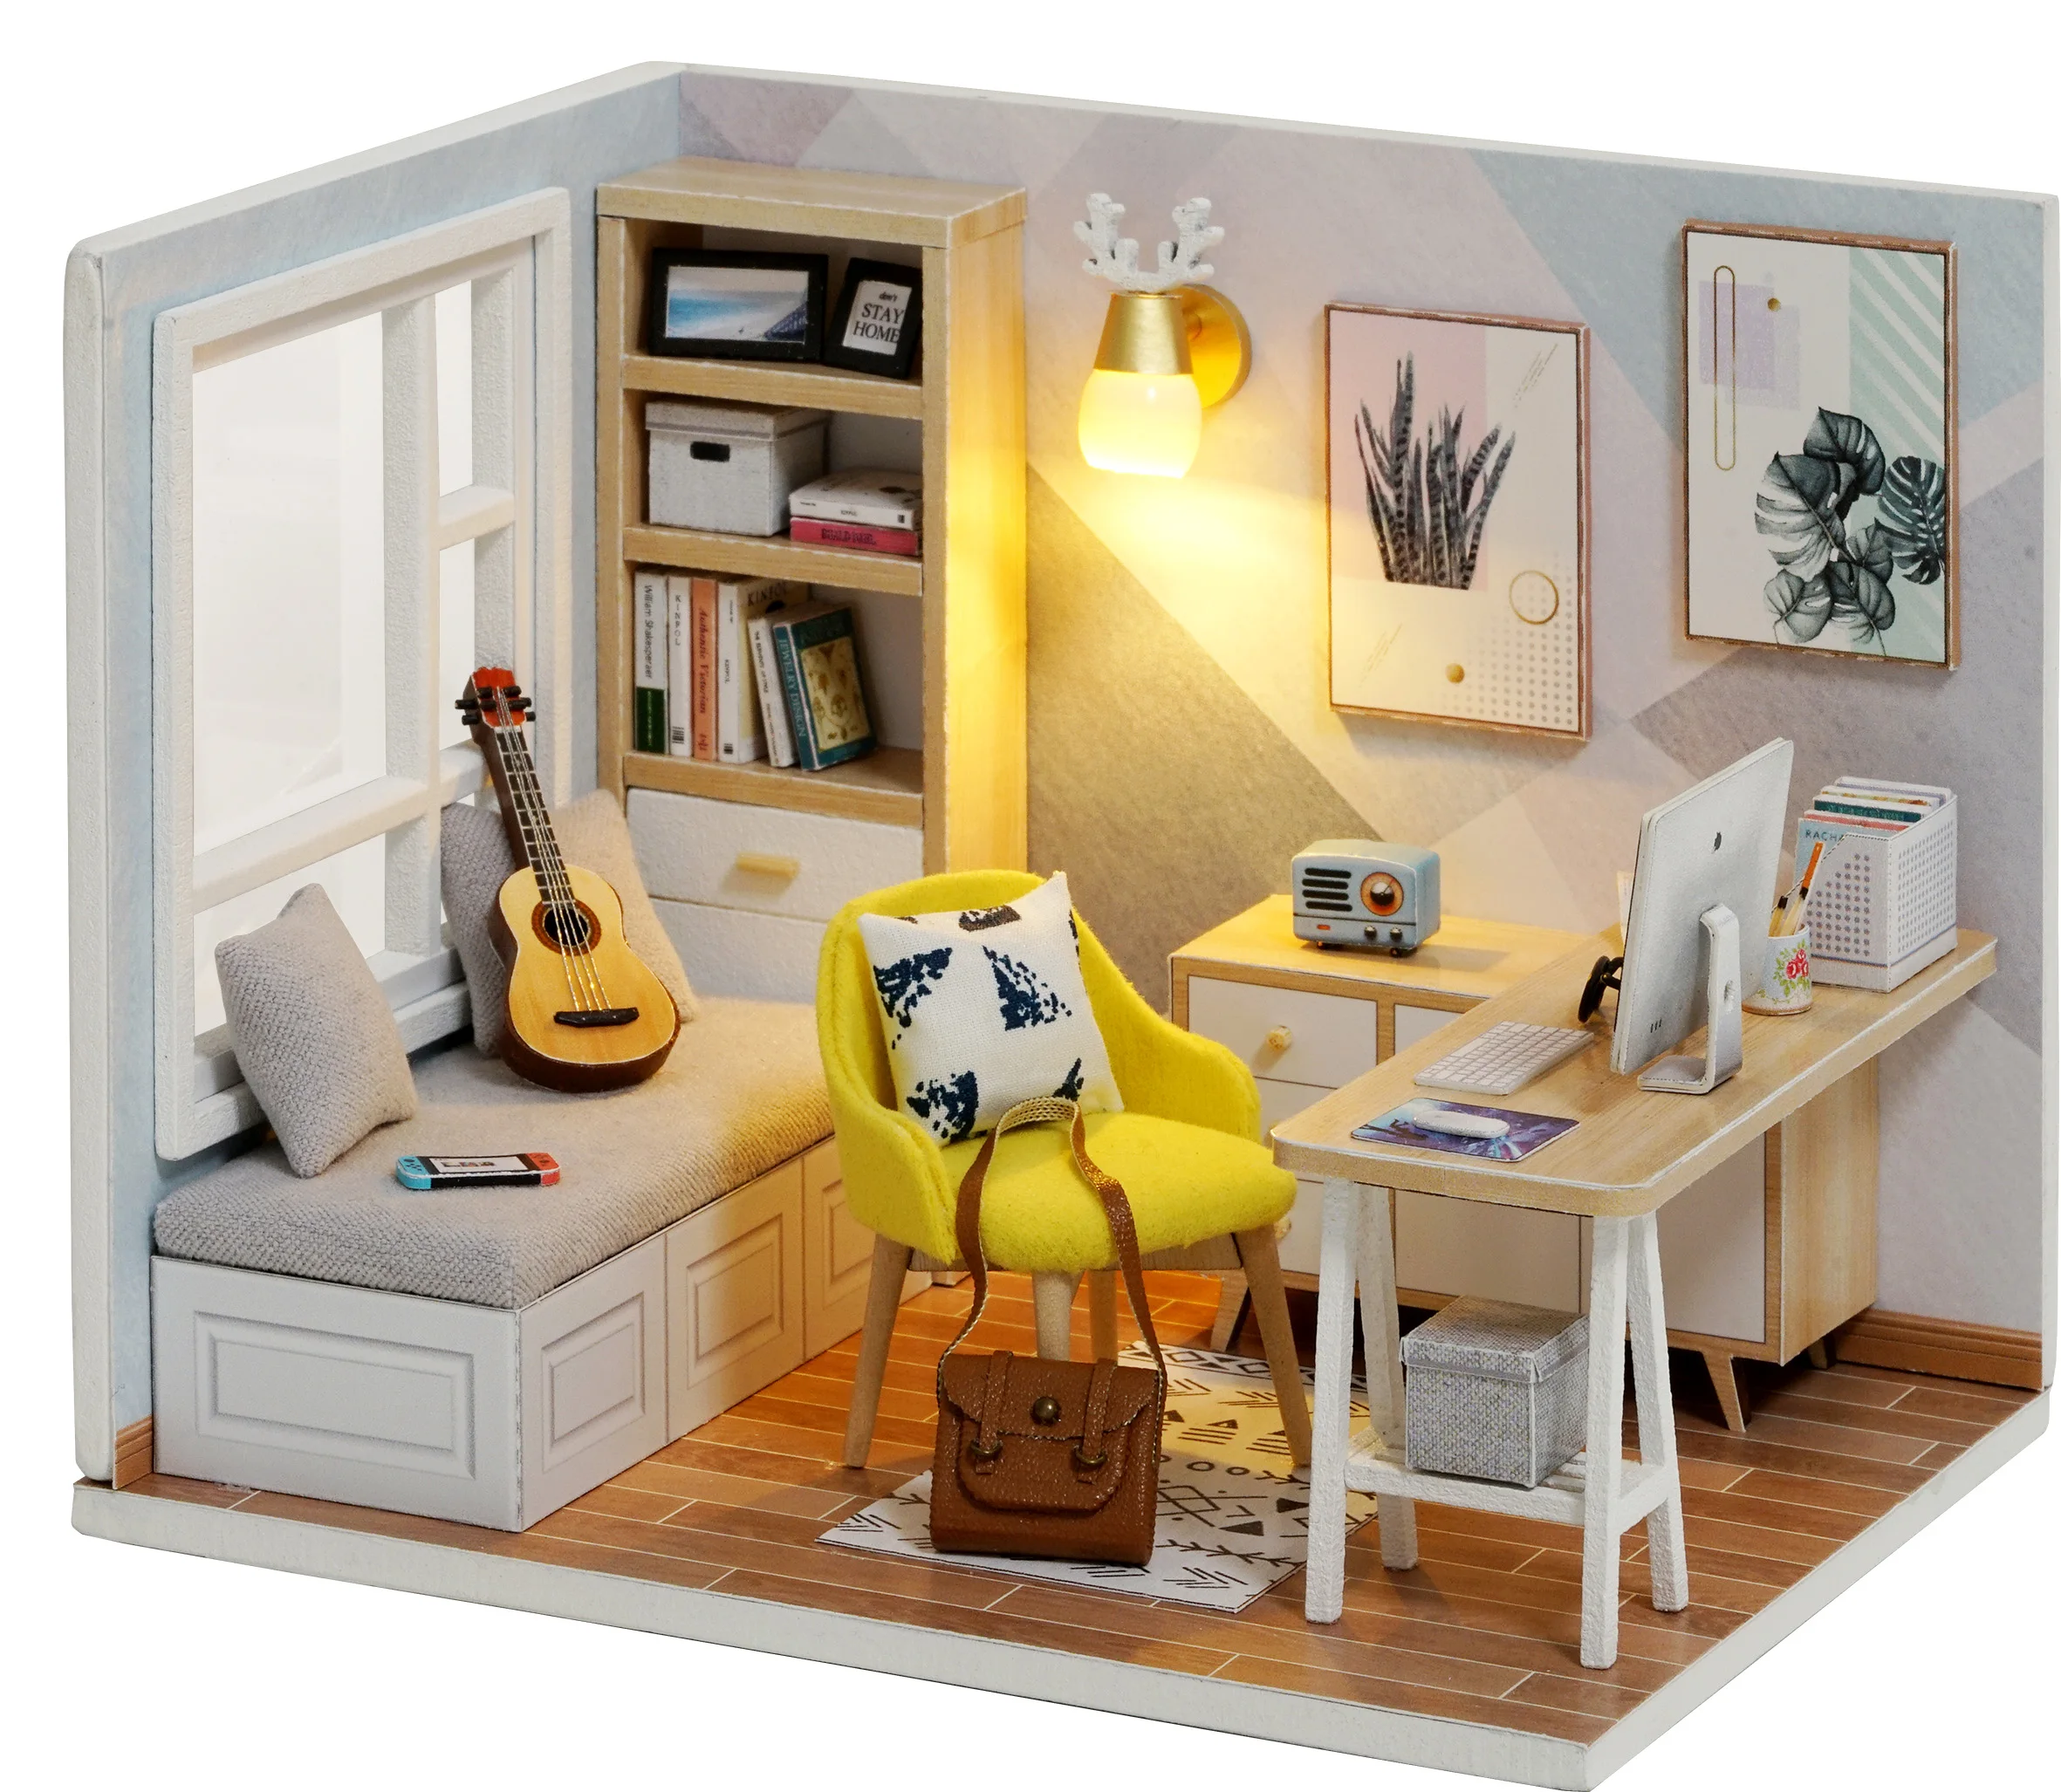 Ture diy miniature 3d wooden miniaturas dollhouse toys for children birthday gifts qt07 thumb200